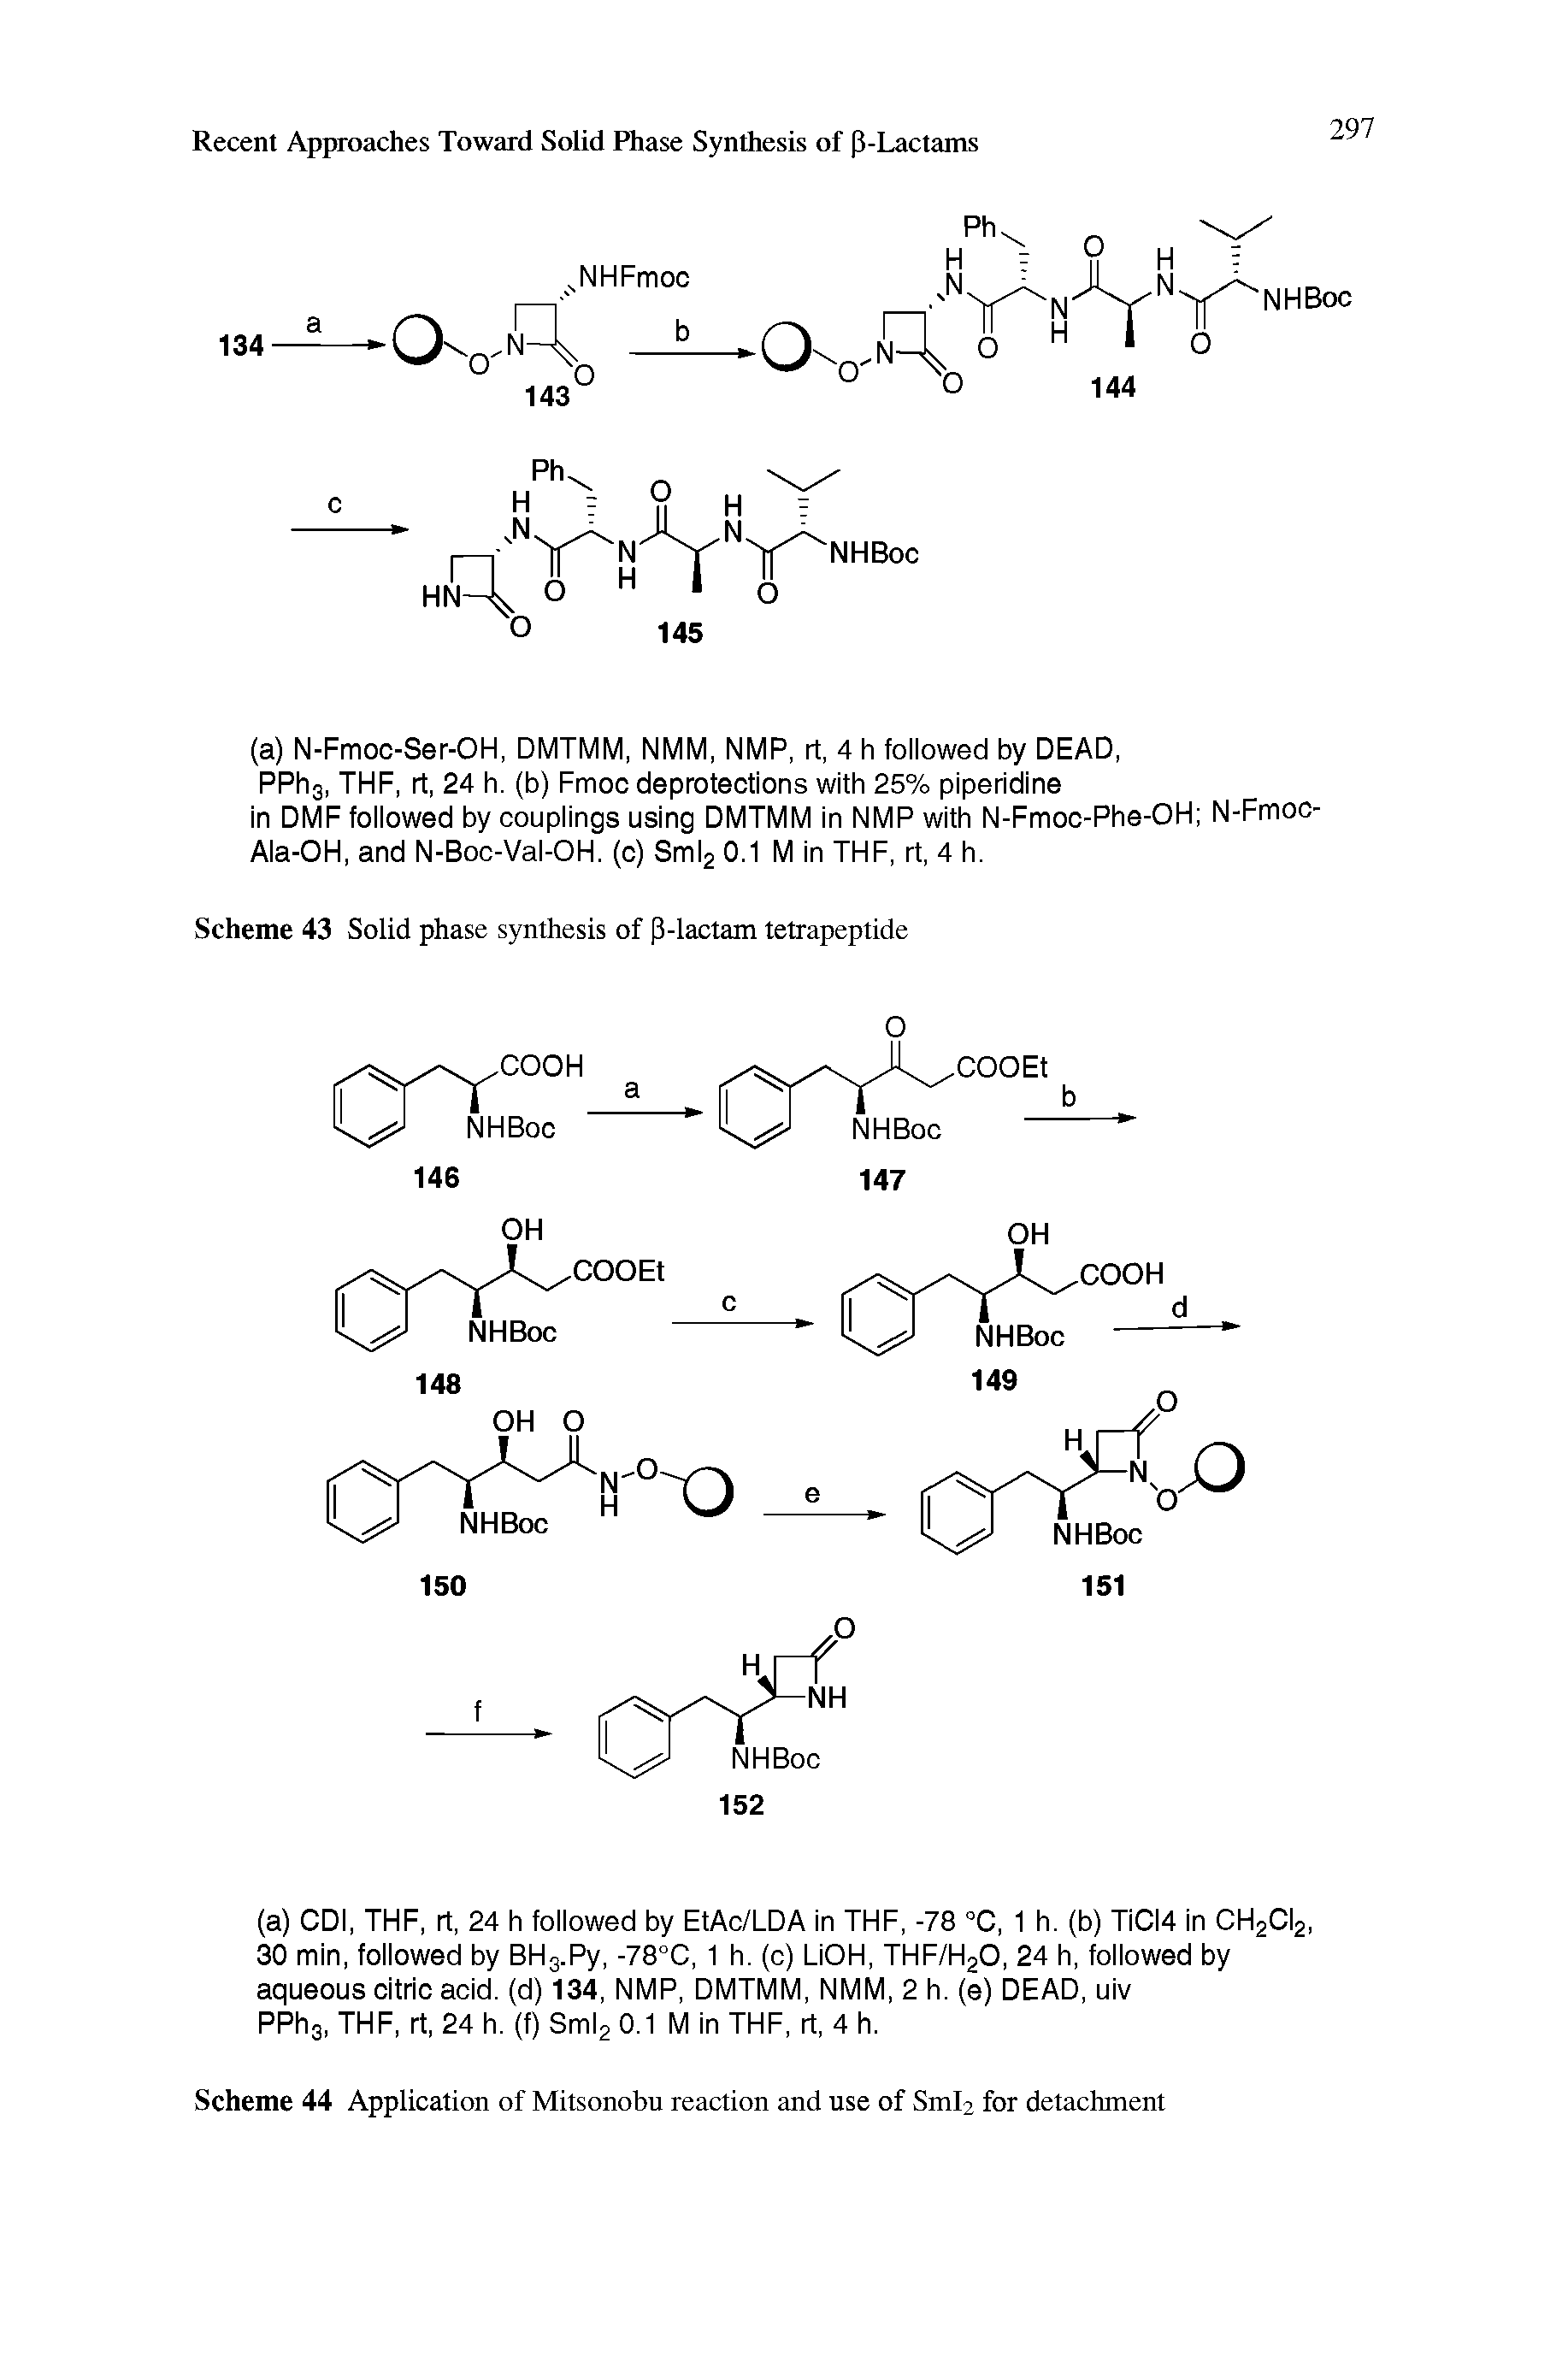 Scheme 44 Application of Mitsonobu reaction and use of Sml2 for detachment...